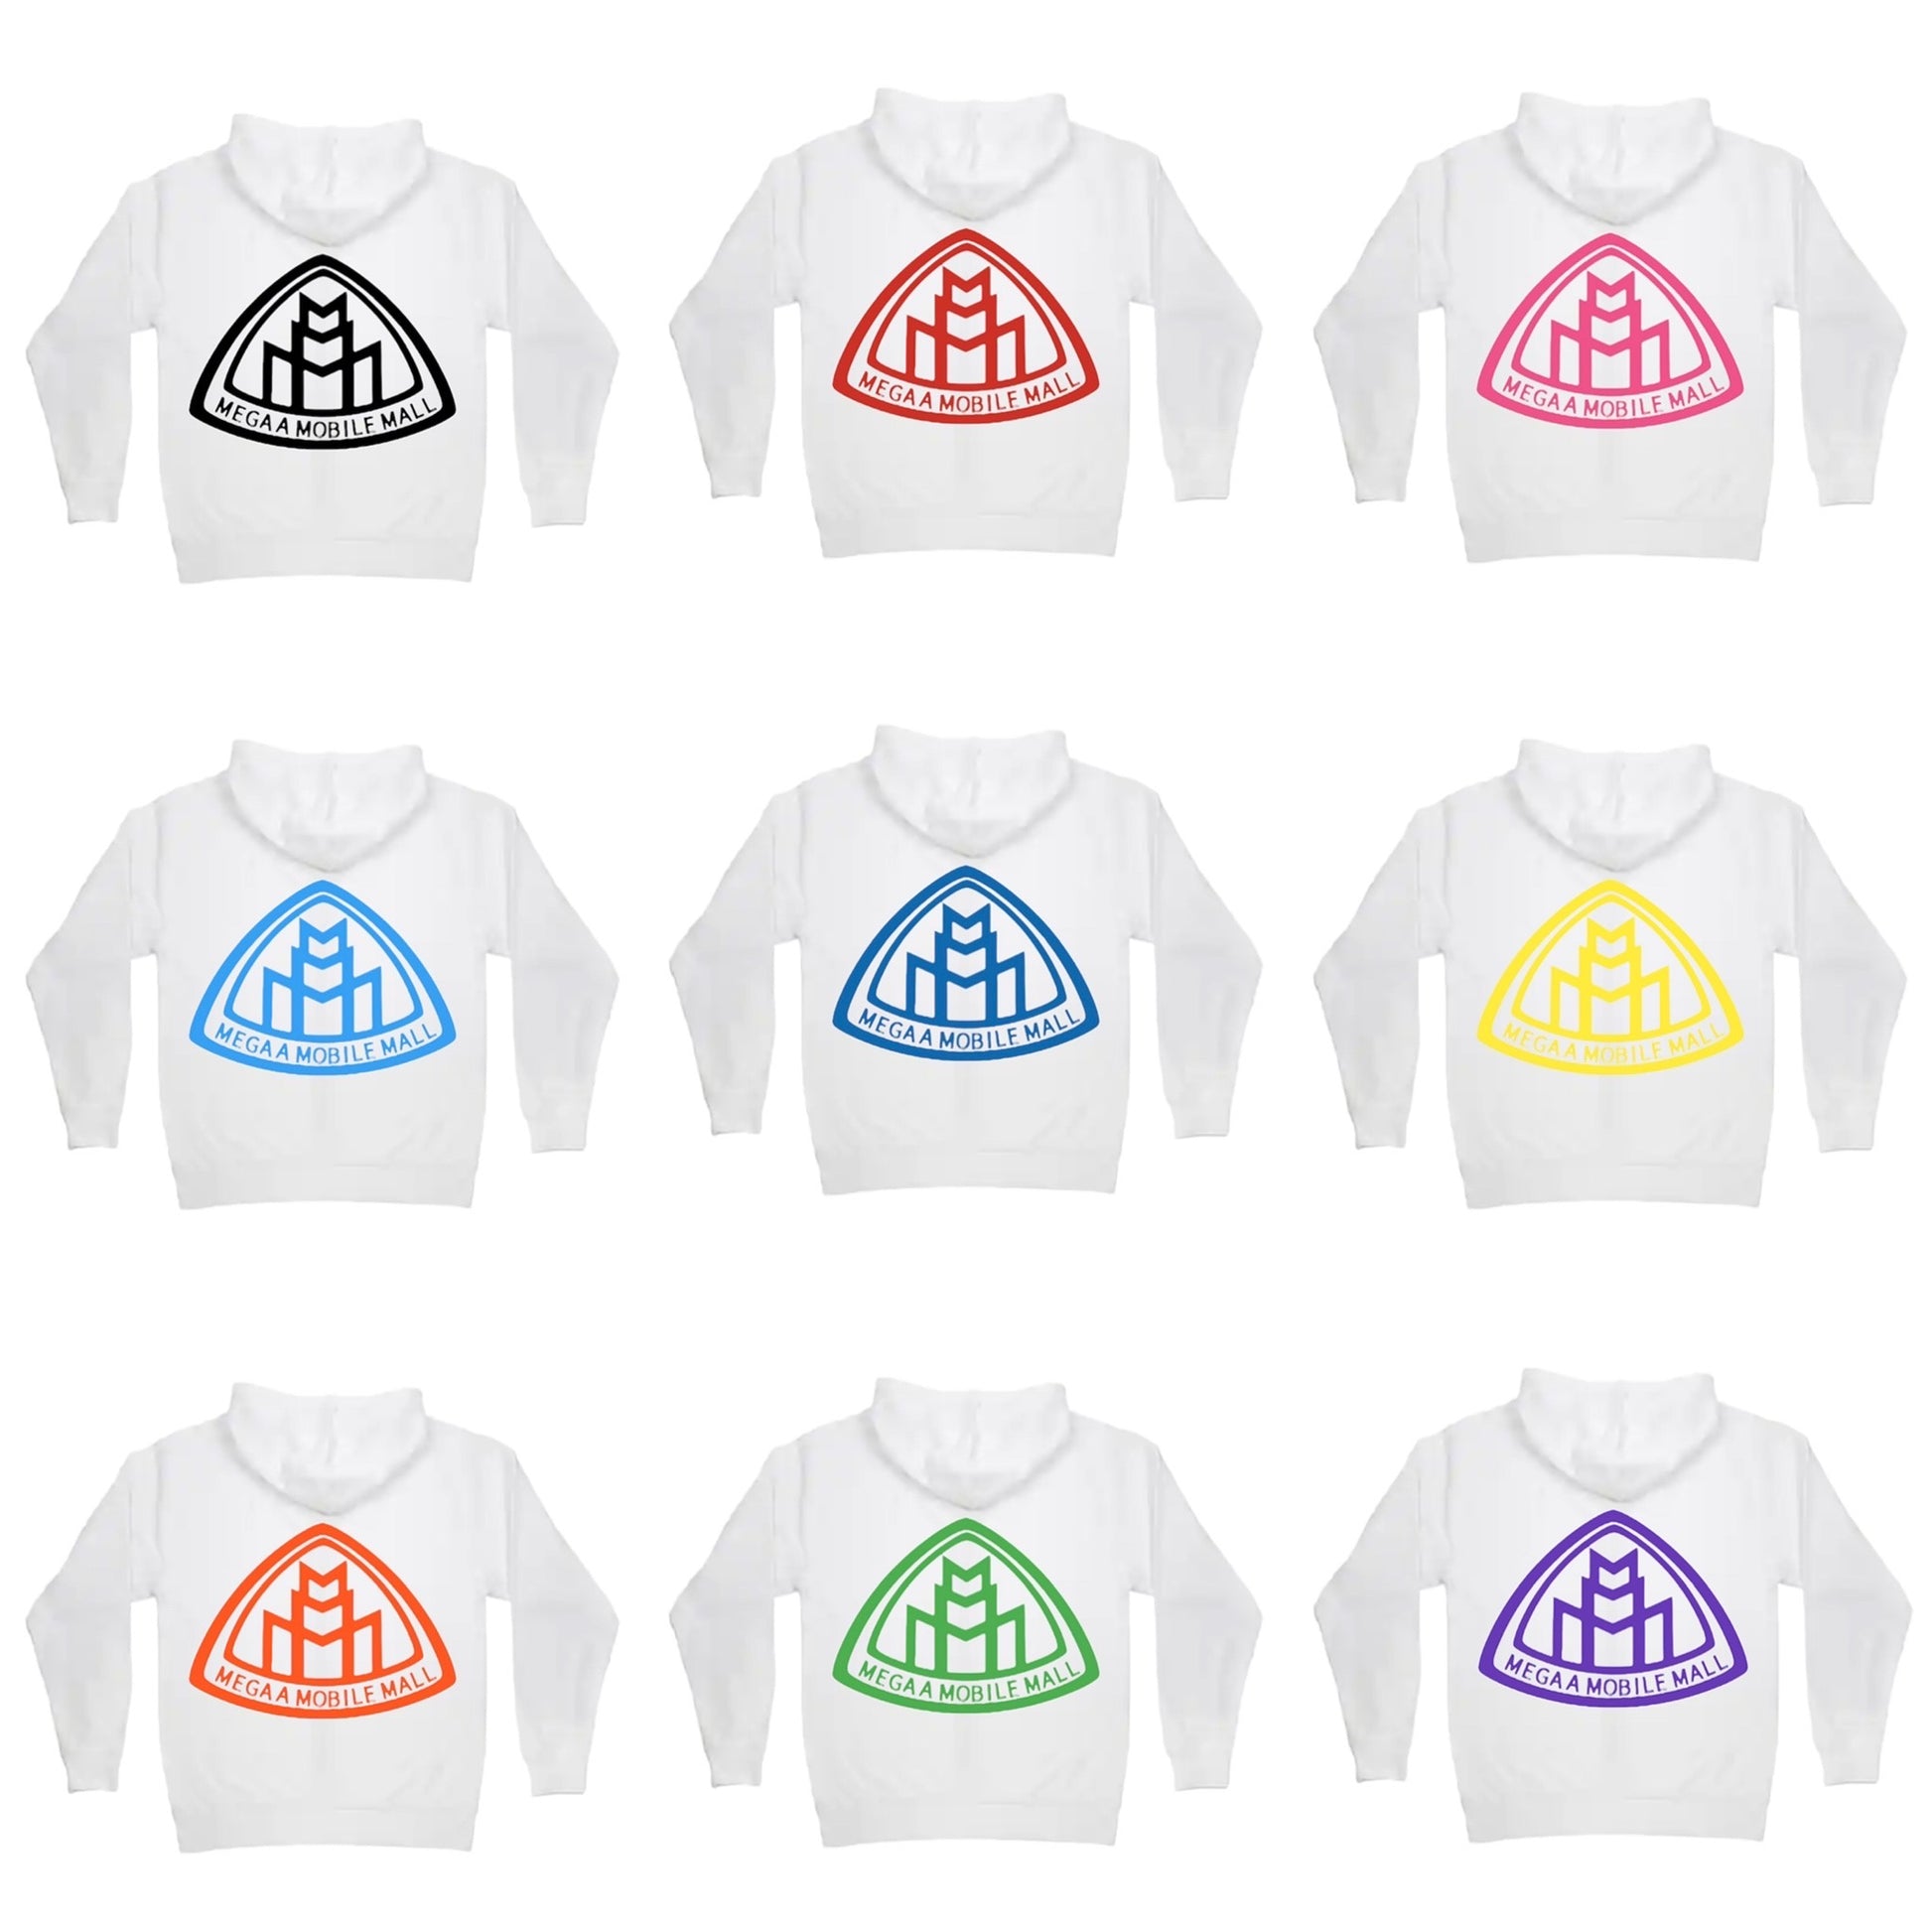 megaamobilemall white zip up hoodie in 9 different logo color options back side